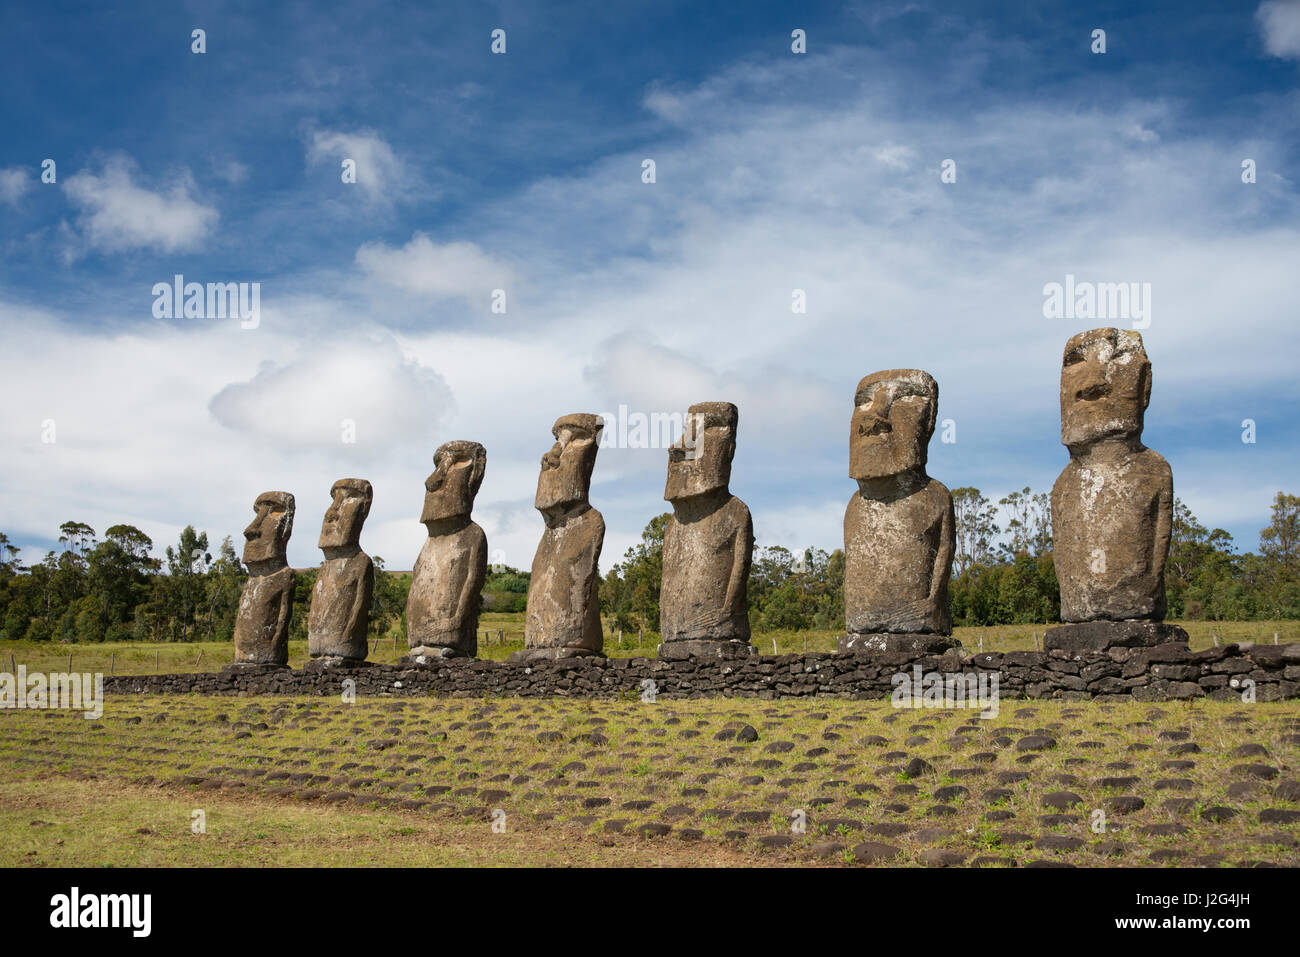 Chile, Easter Island aka Rapa Nui. Ahu Akivi, ceremonial platform with seven restored standing moi statues. Rapa Nui National Park, UNESCO. (Large format sizes available) Stock Photo